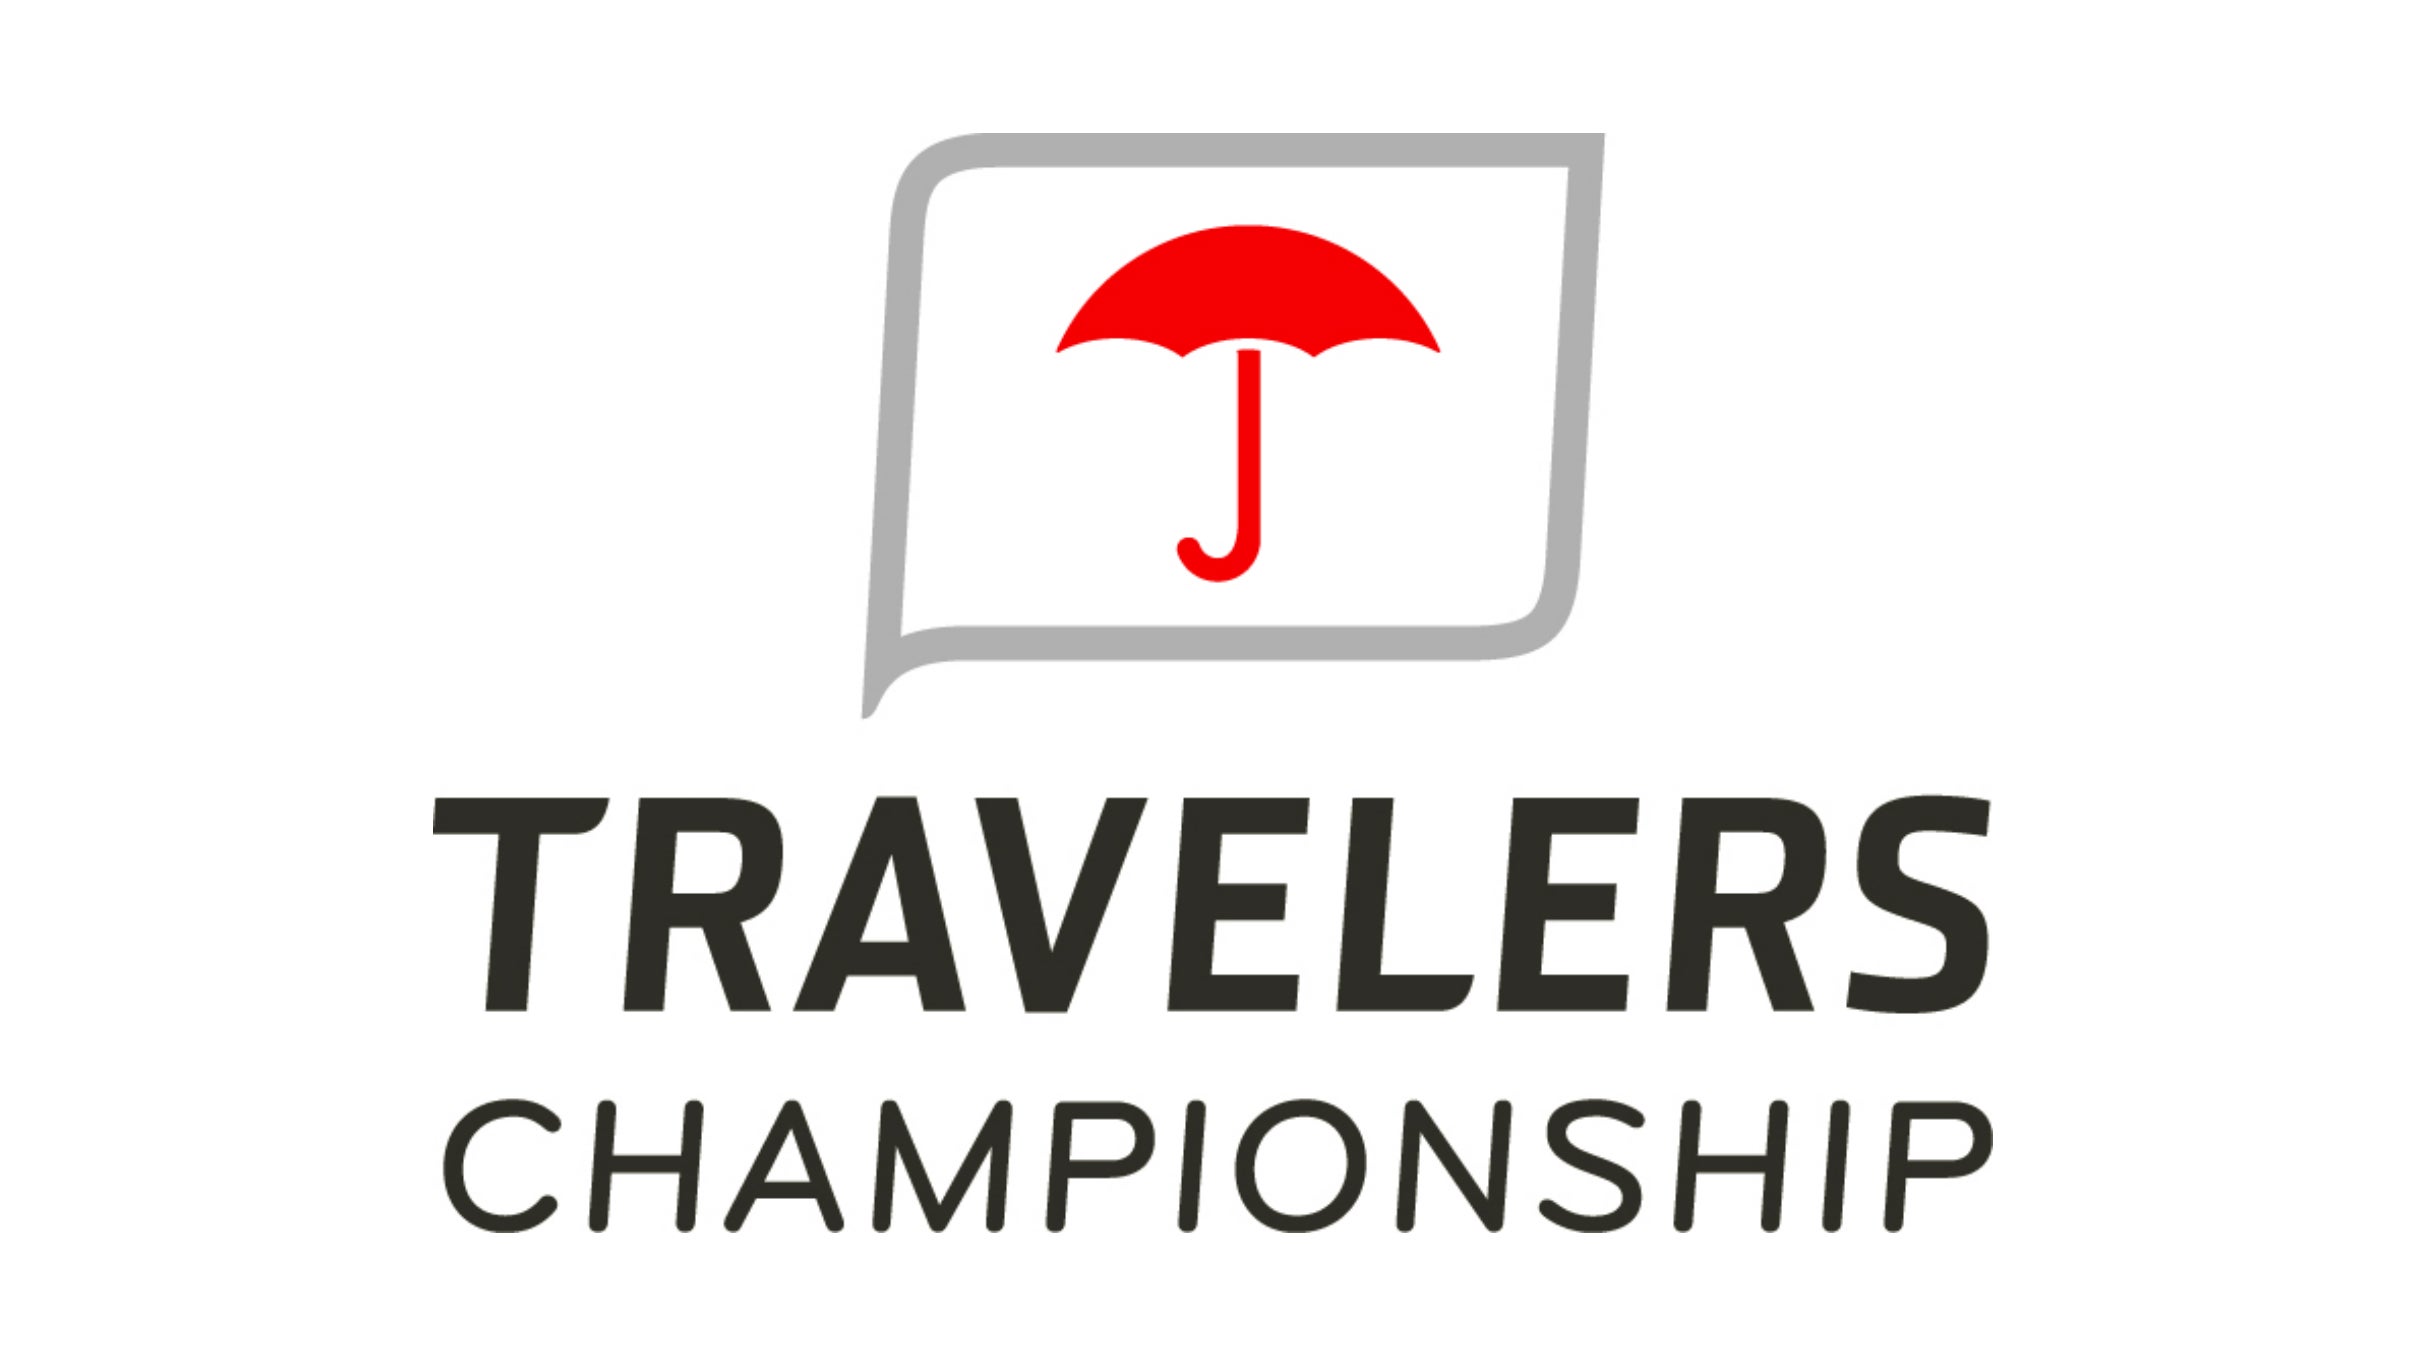 Travelers Championship Wednesday at TPC River Highlands